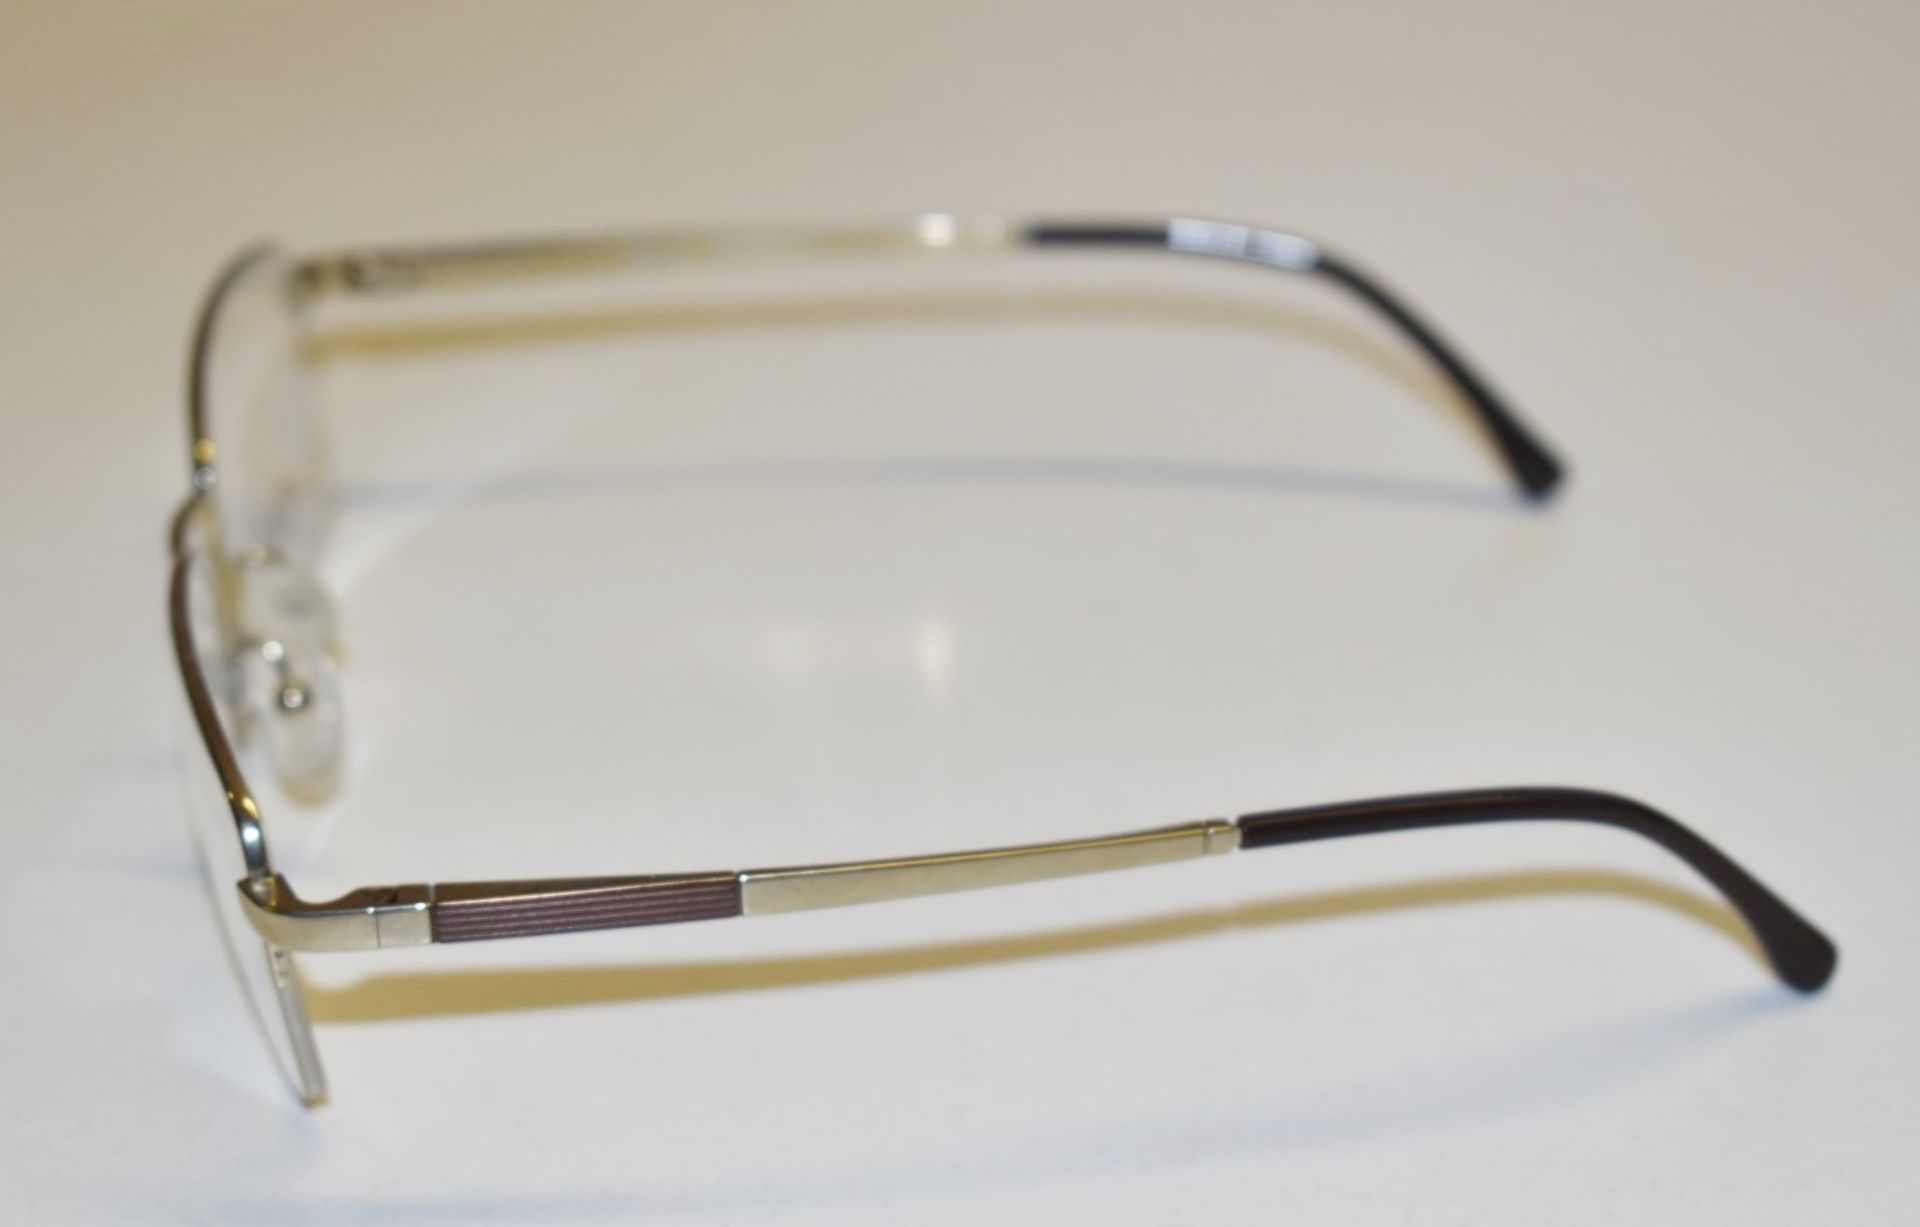 1 x Genuine FERUCCI Spectacle Eye Glasses Frame - Ex Display Stock  - Ref: GTI182 - CL645 - - Image 4 of 12